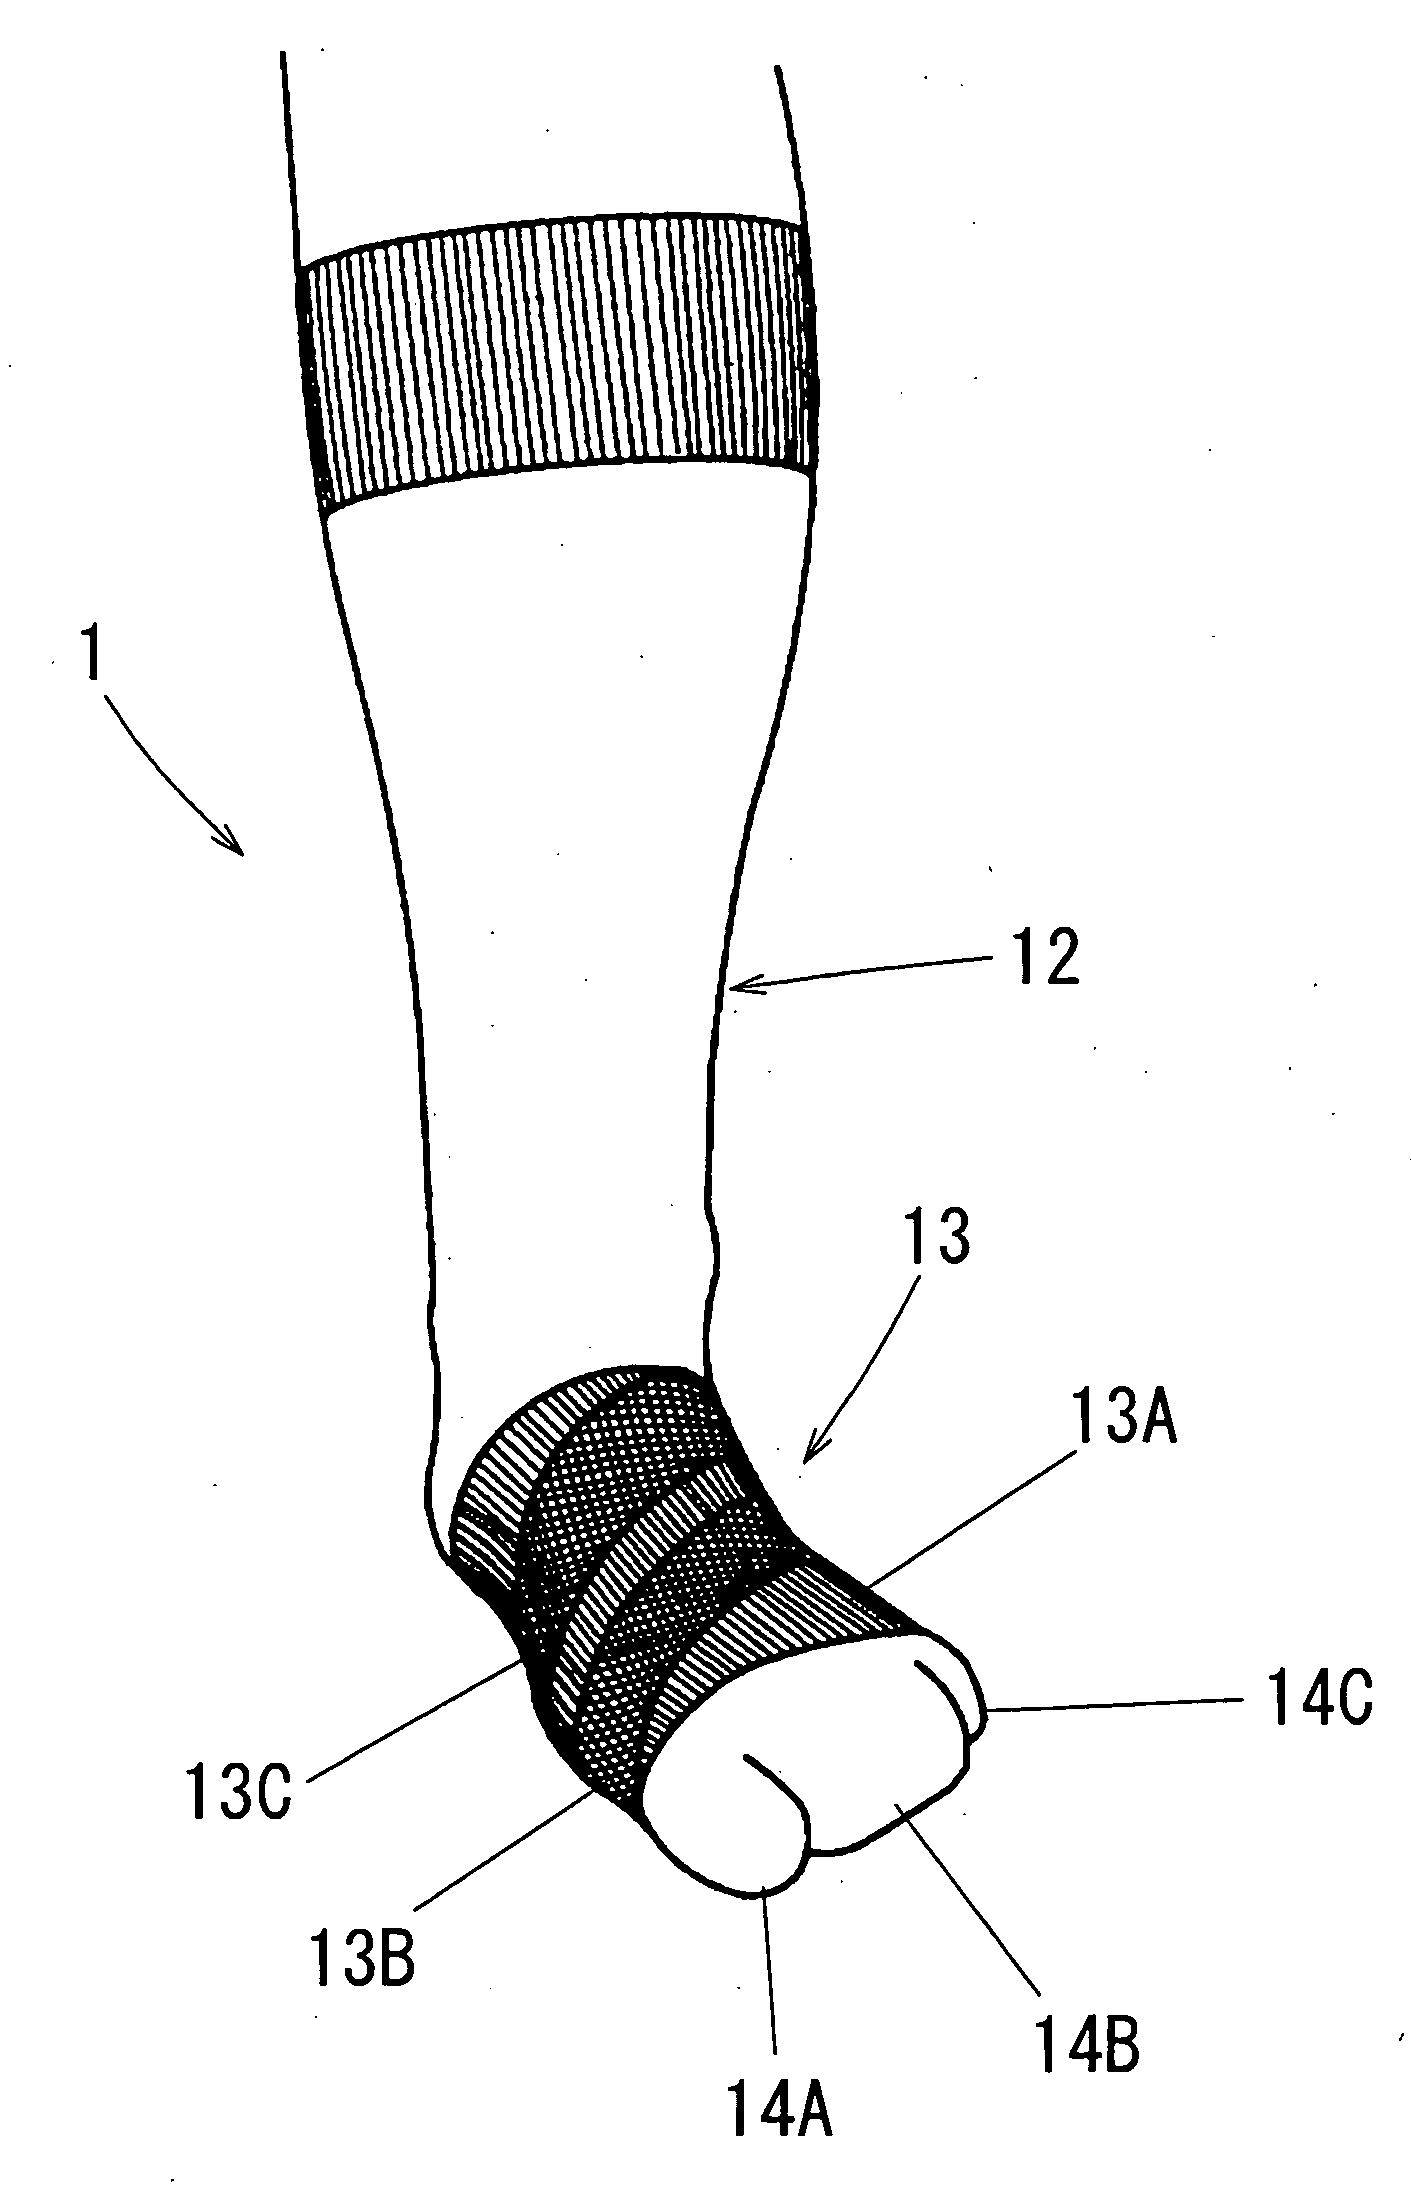 Corrective socks featuring elastic bands and reinforcing bands to correct hallux valgus and digitus quintus varus